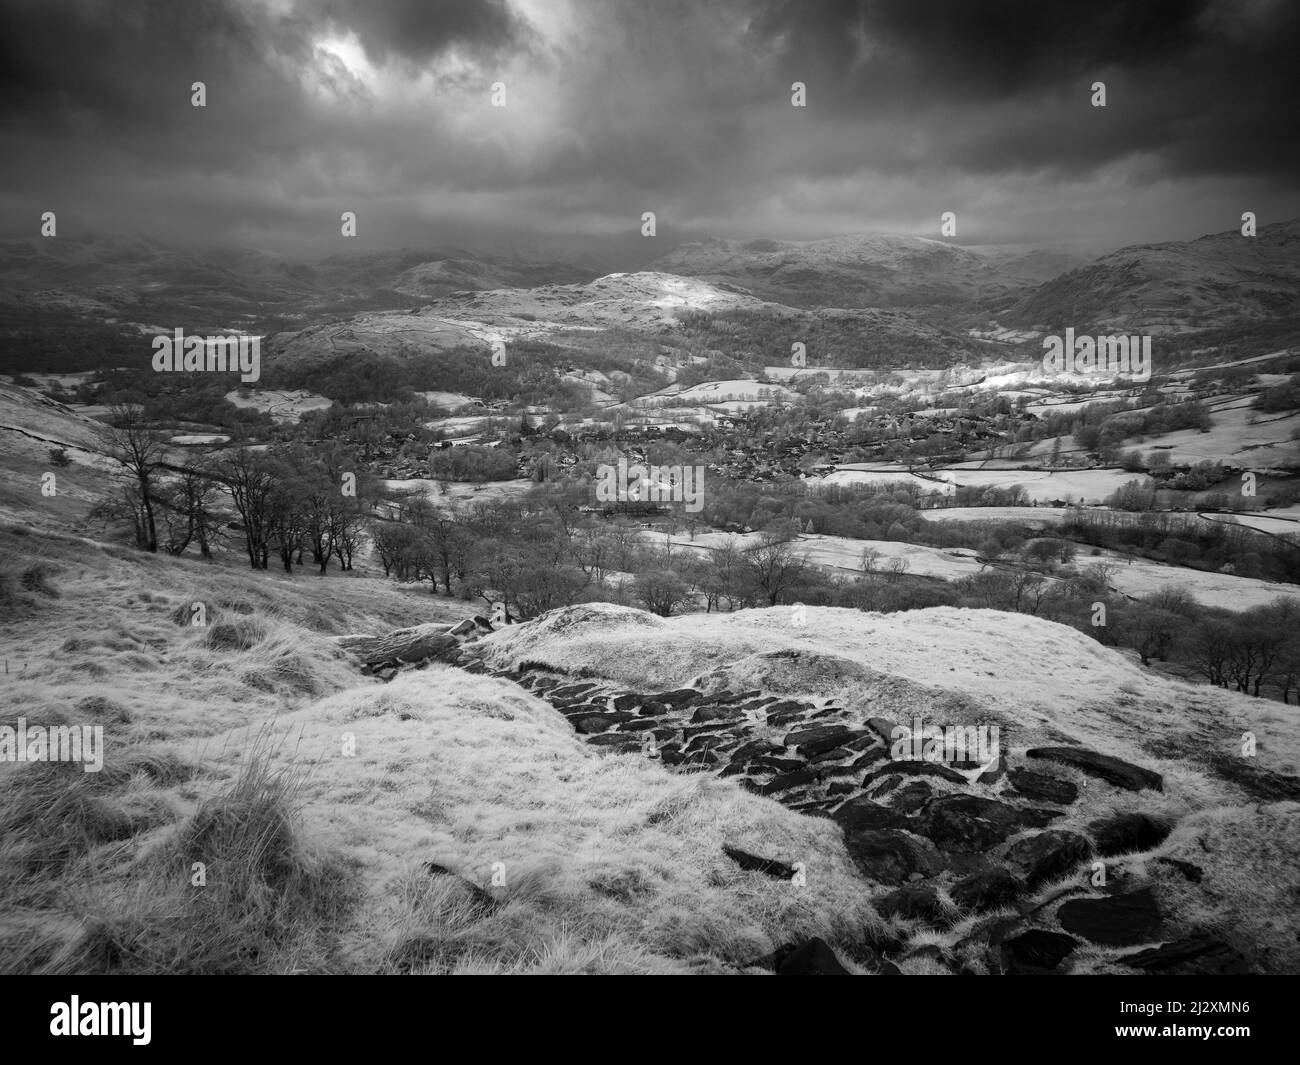 A black and white image of Ambleside, and Loughrigg Fell from Wansfell in the Lake District National Park, Cumbria, England. Stock Photo